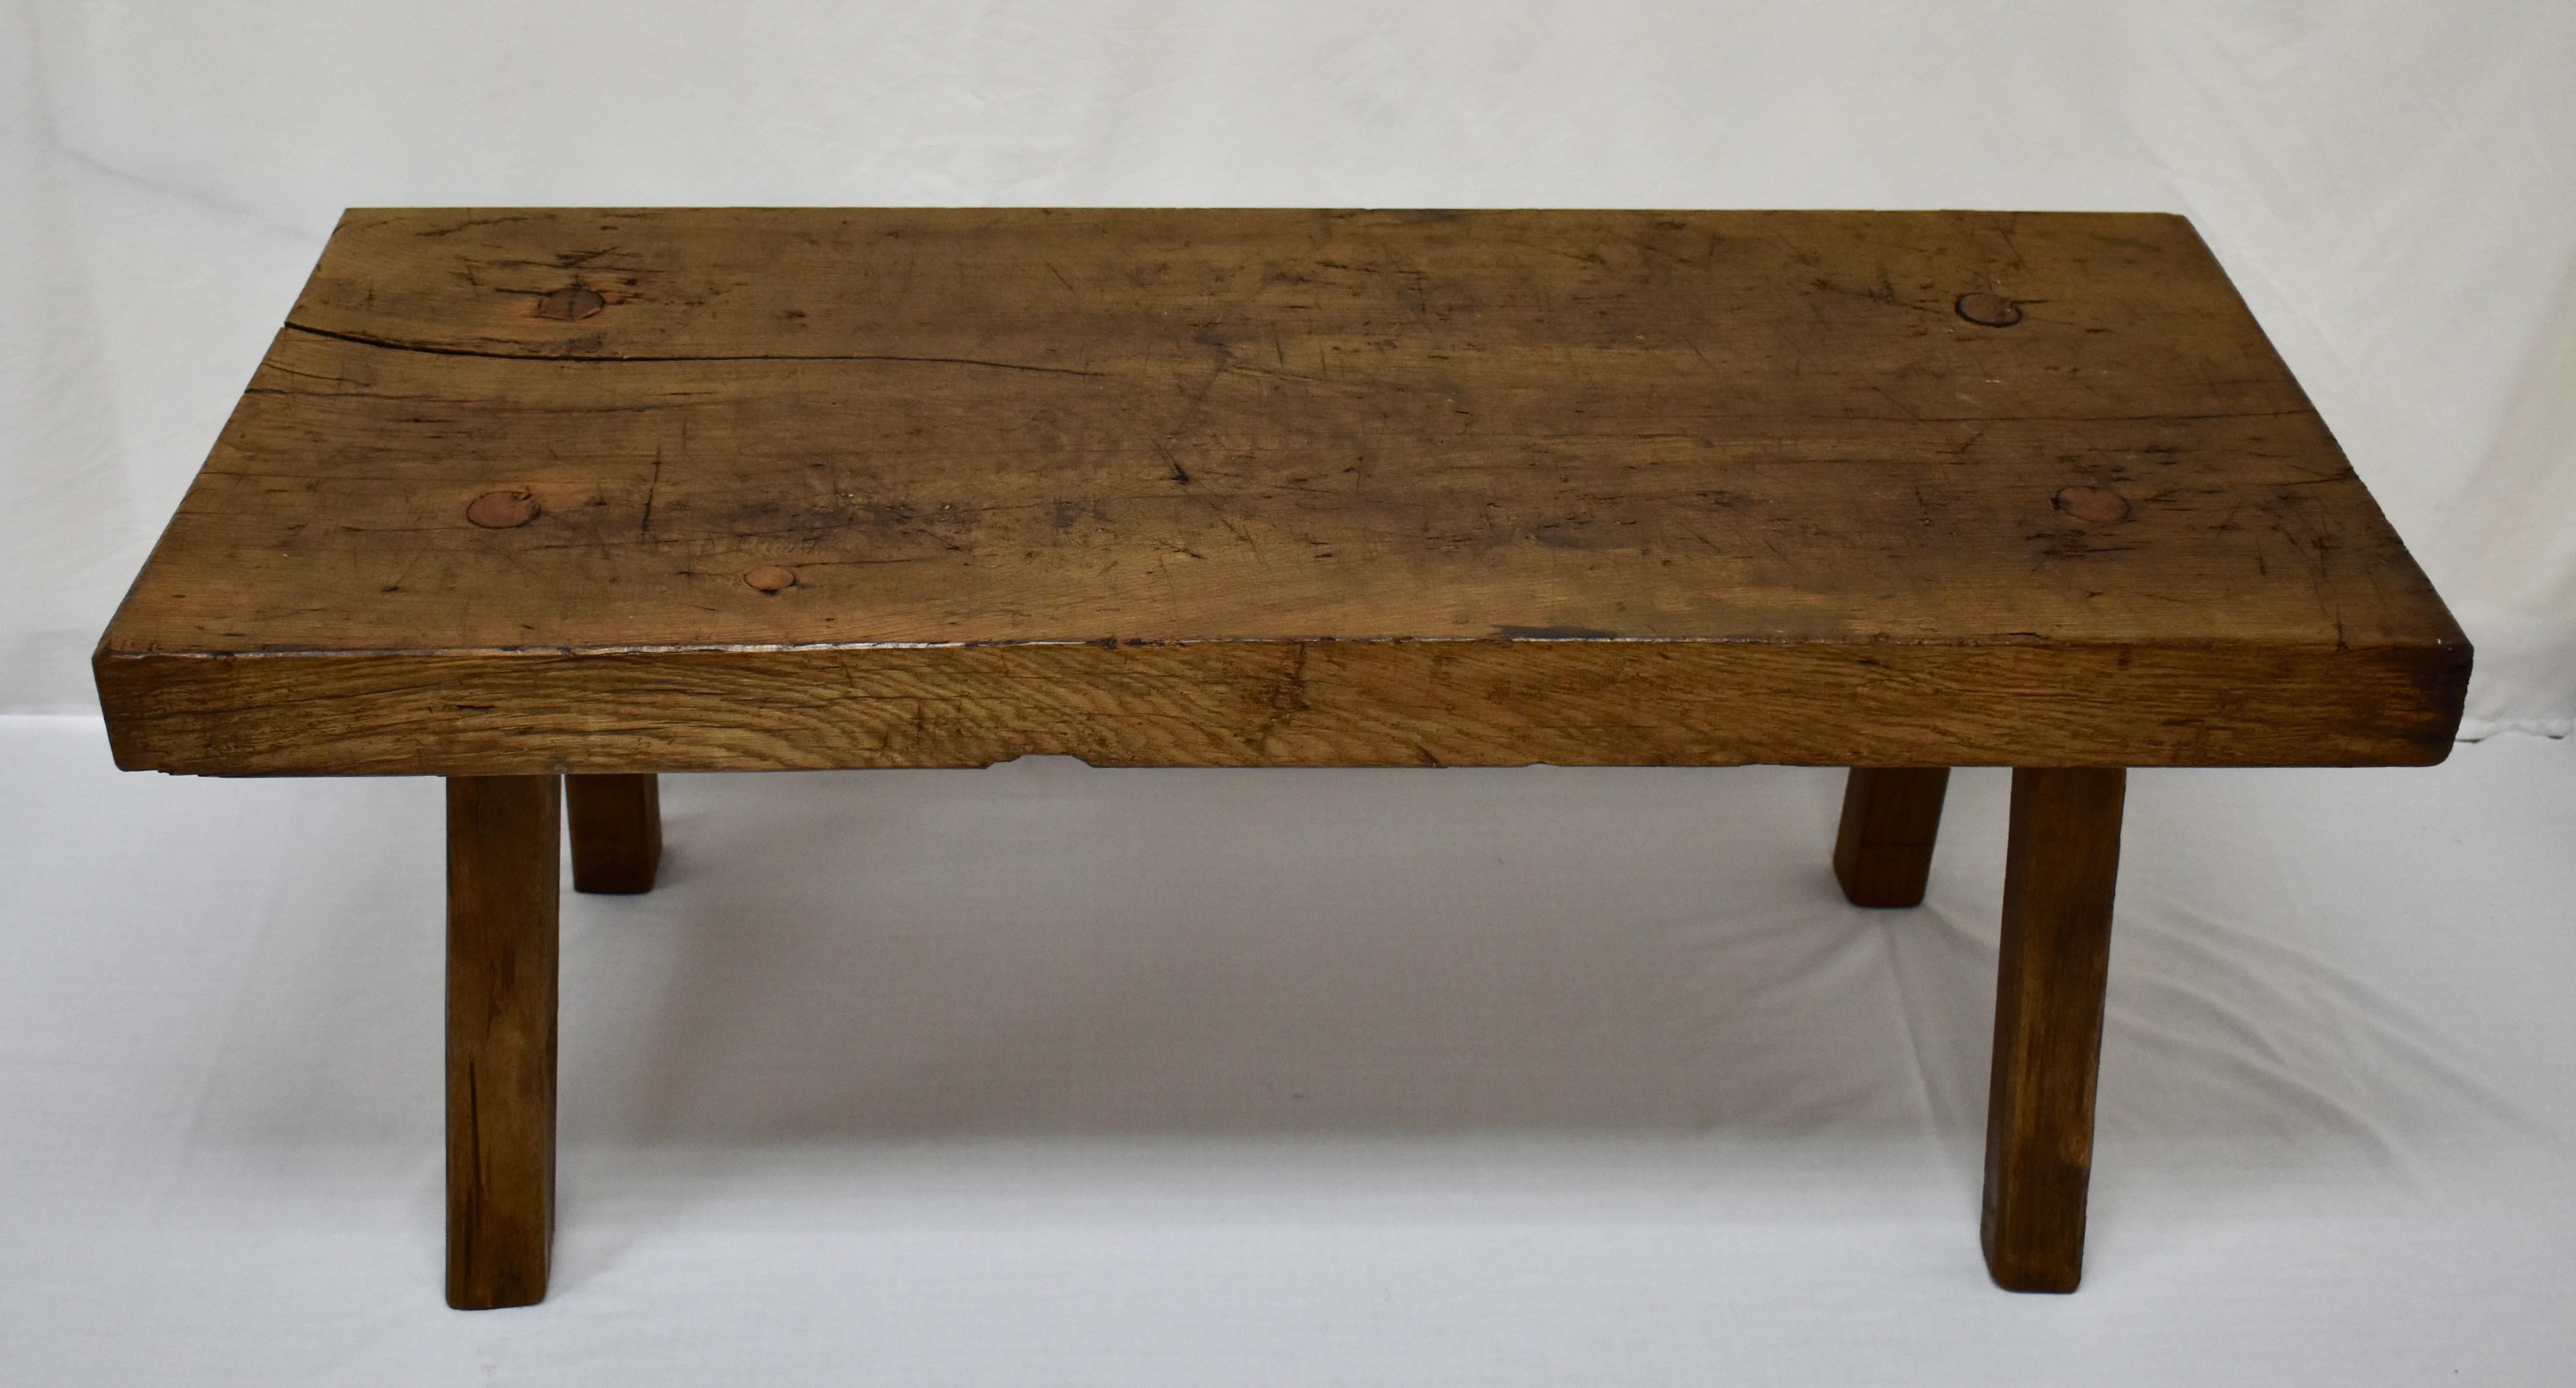 This handsome butcher’s block low table stands on four splayed legs over 2” square which are through-tenened and wedged into the underside of the top. The top itself is a single oak slab over 3” thick with scratches, scrapes, and dings indicating